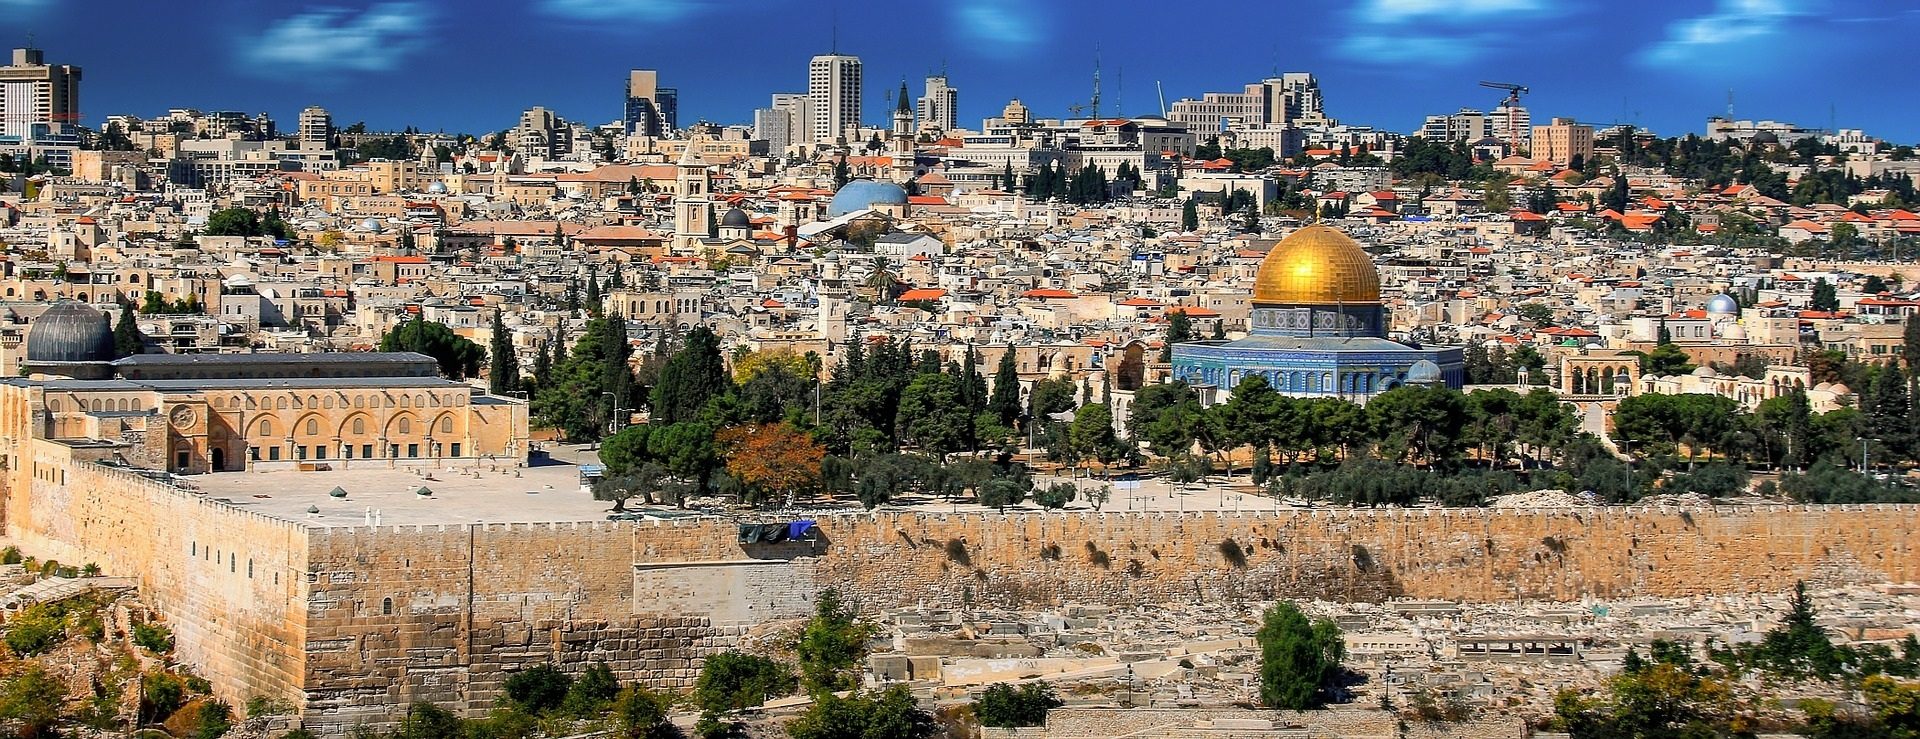 Are You Visiting Israel? Here are the Top Sights and Attractions You Shouldn’t Miss